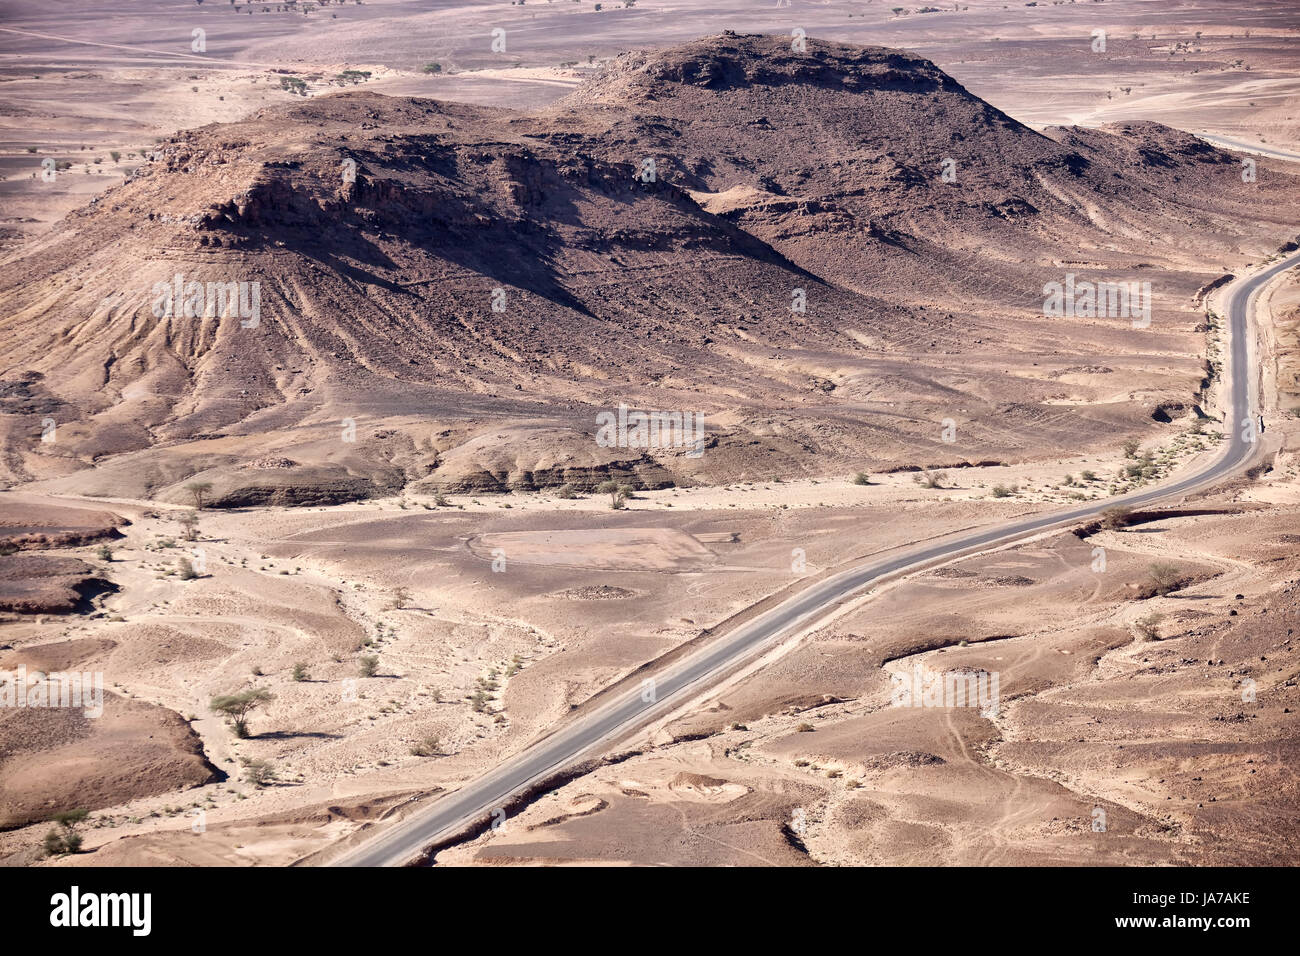 desert, wasteland, dry, dried up, barren, landscape, scenery, countryside, Stock Photo